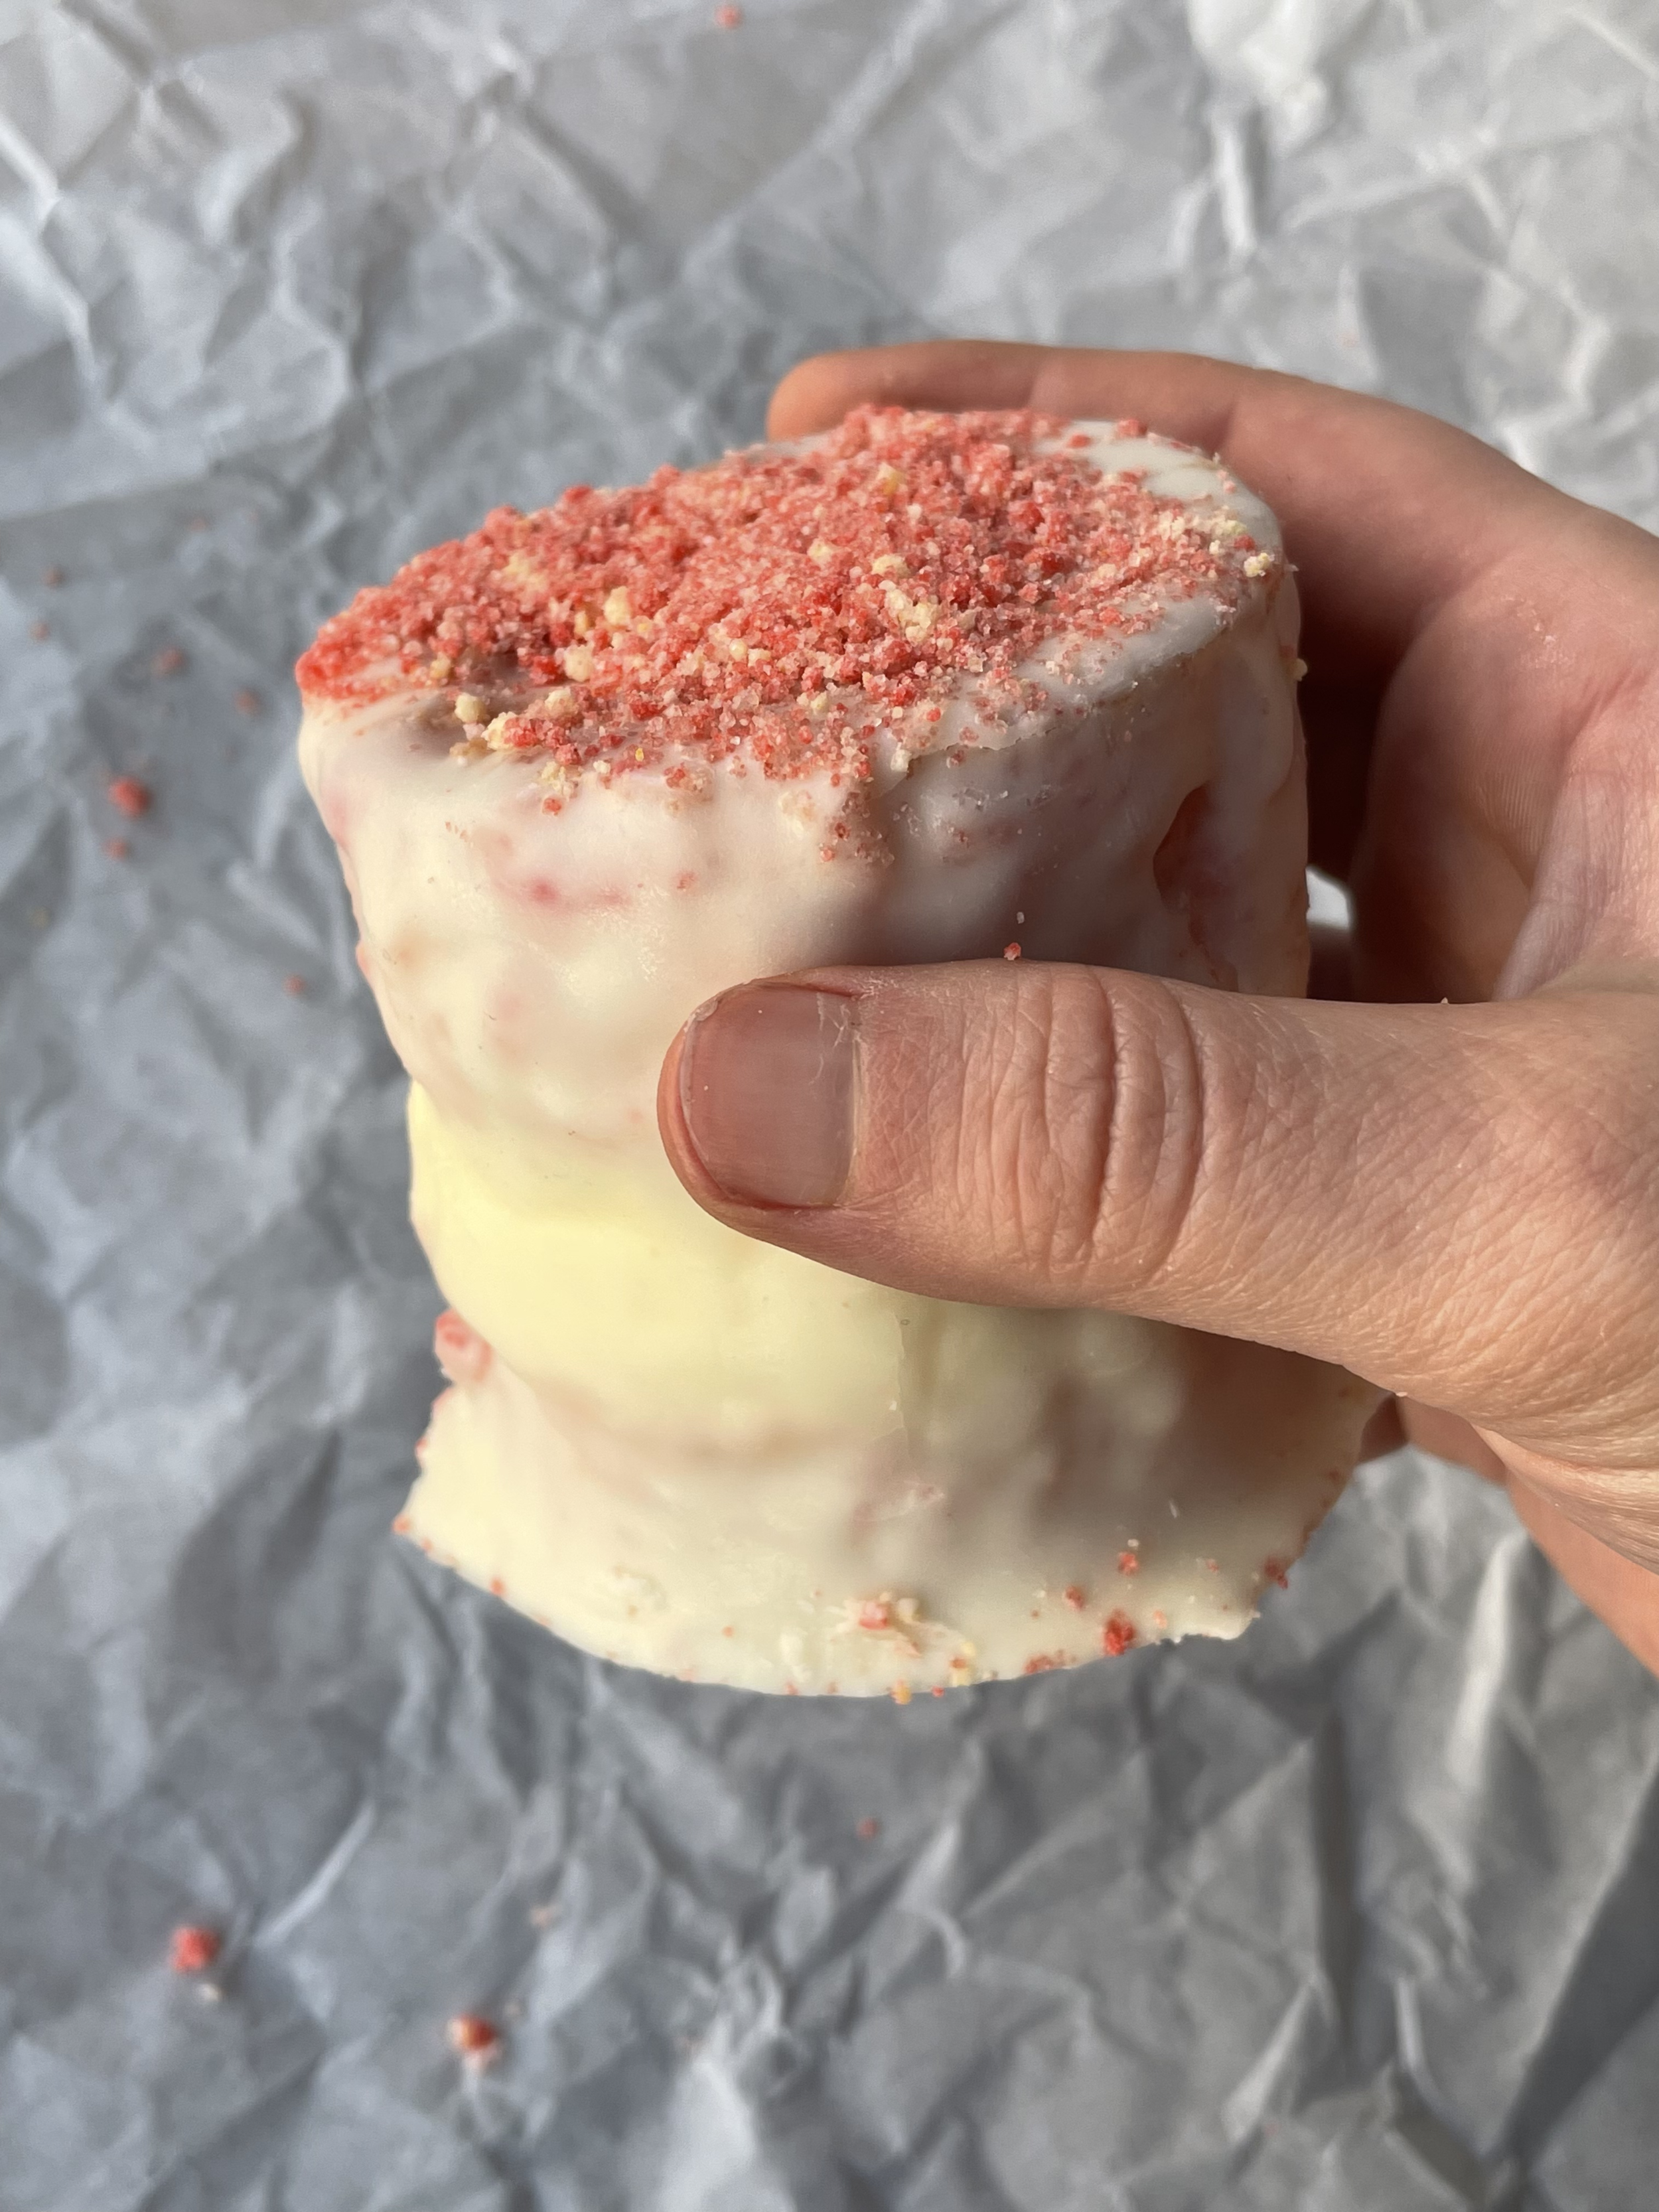 $5.00 Strawberry Shortcake Ding Dong